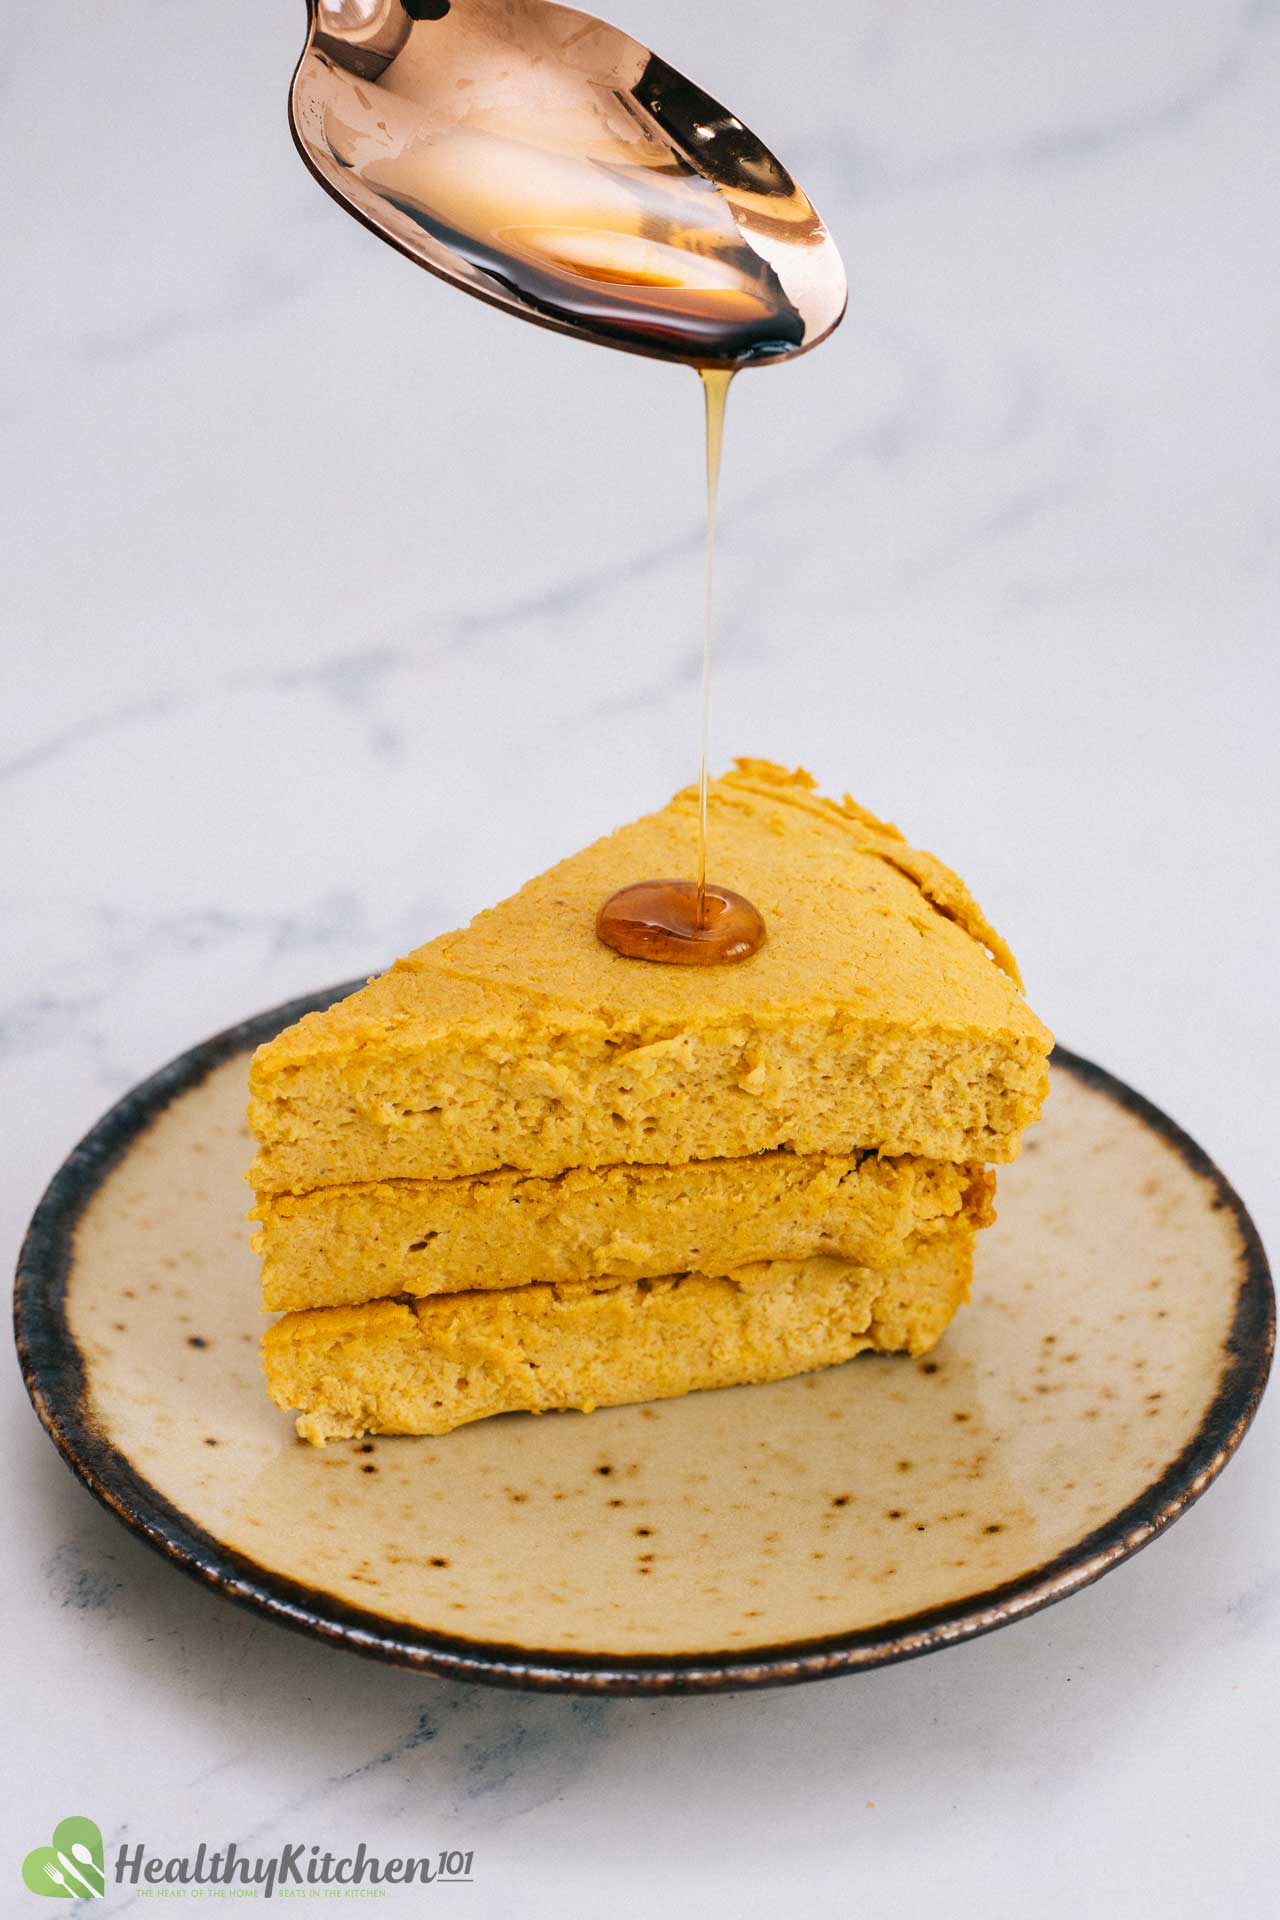 Healthy Pumpkin Cheesecake Recipe - It Is Even Crustless And Low-carb